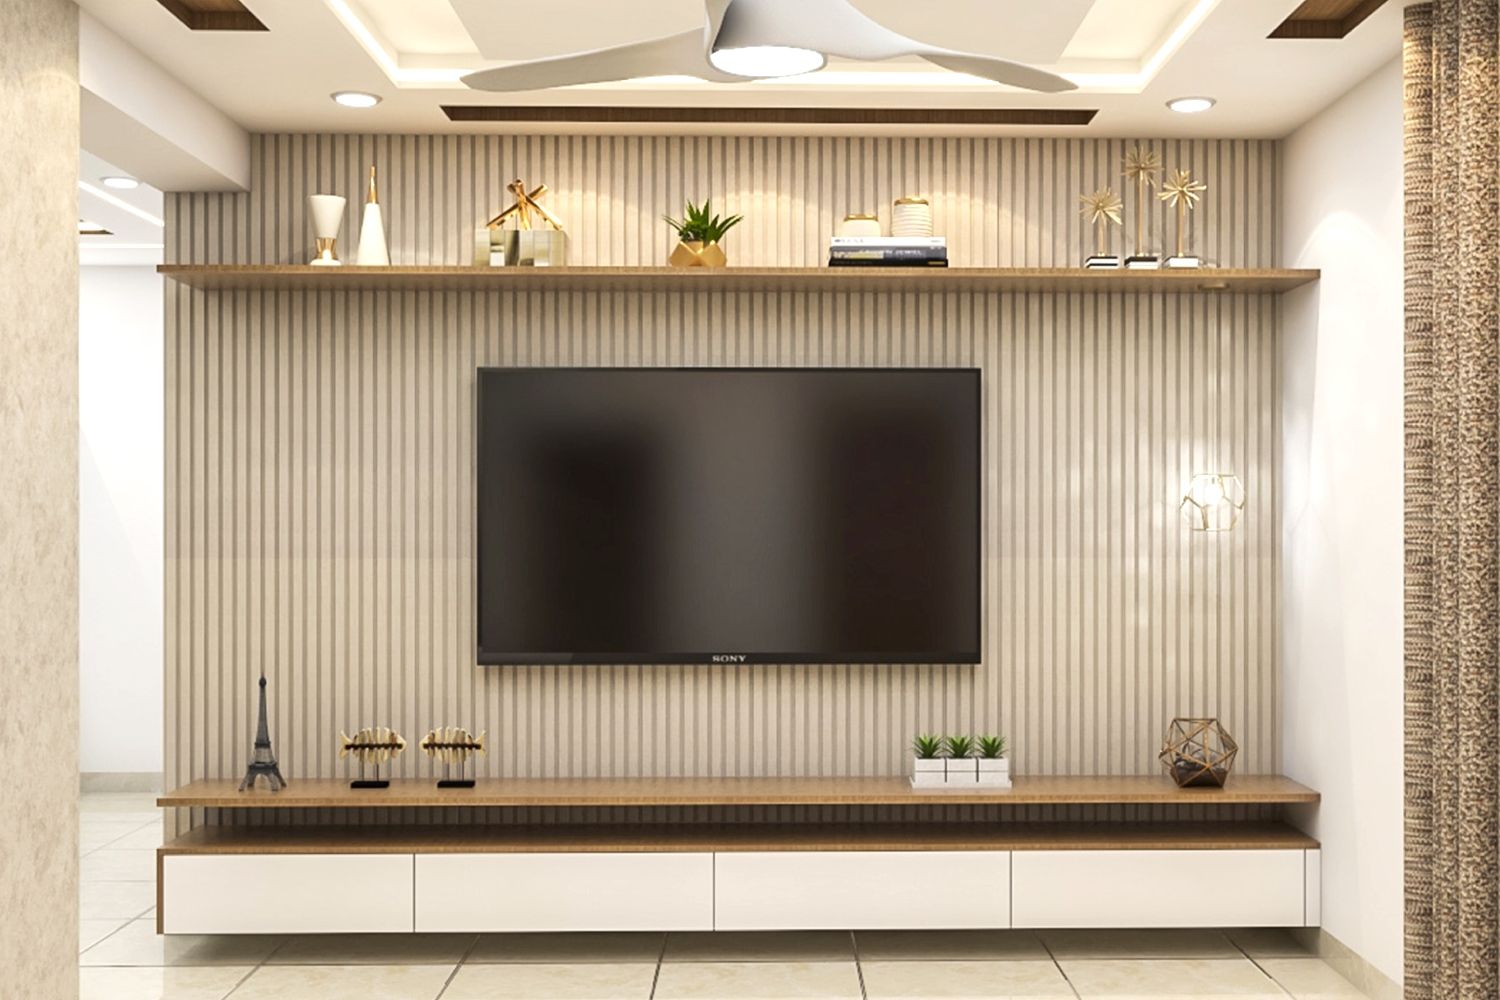 Contemporary Persian Walnut and Frosty White TV Unit Design with Wall-Mounted Cabinet